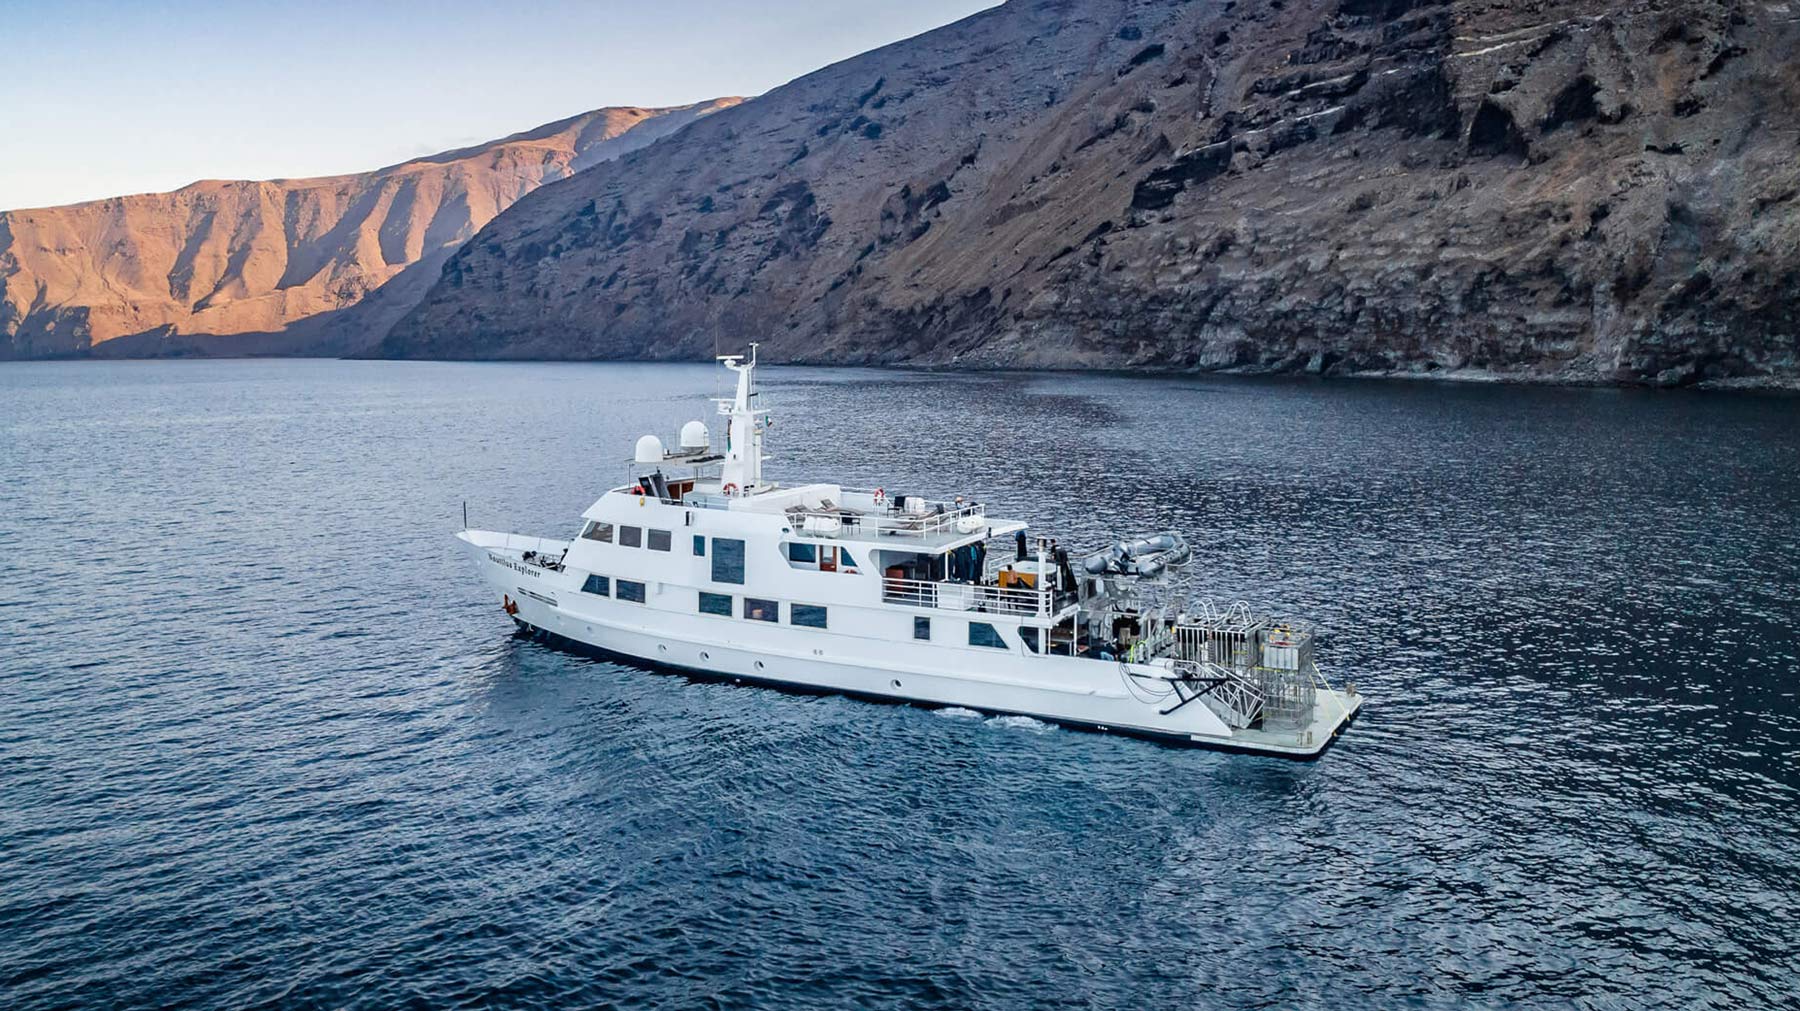 5 Totally Different Sea Of Cortez Trips